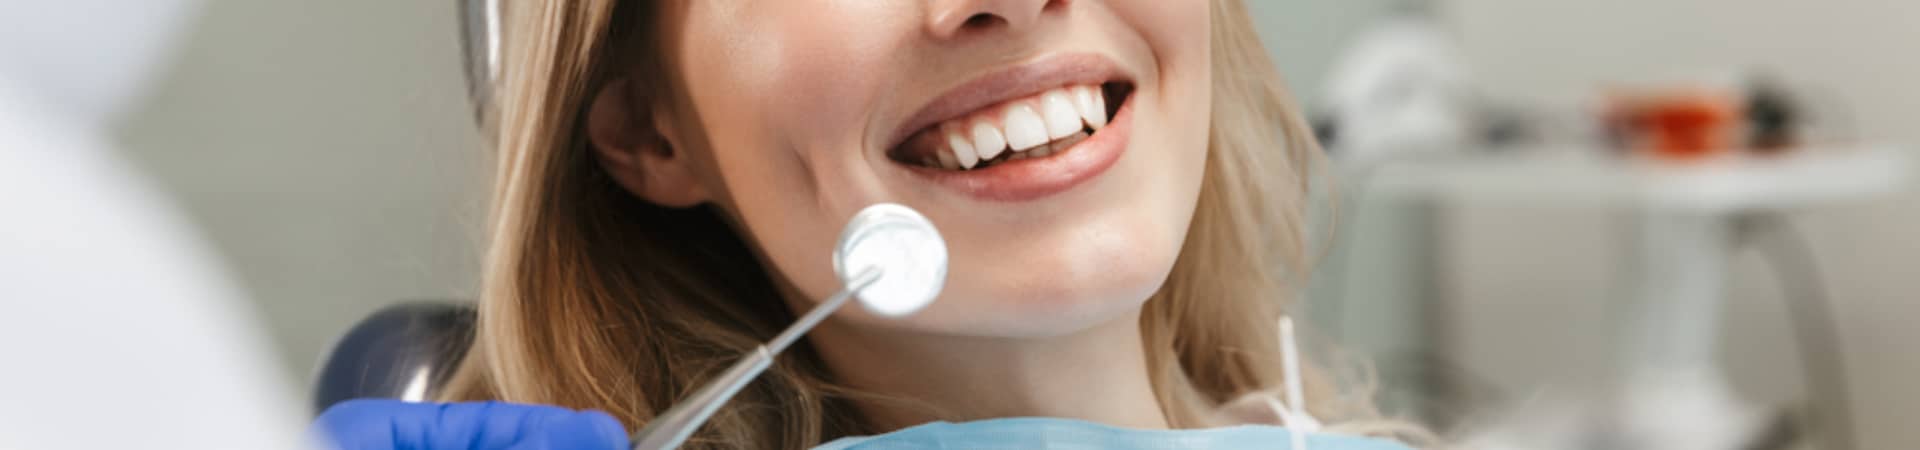 Soft Touch Dentistry: General & Cosmetic Dentistry in Boston MA